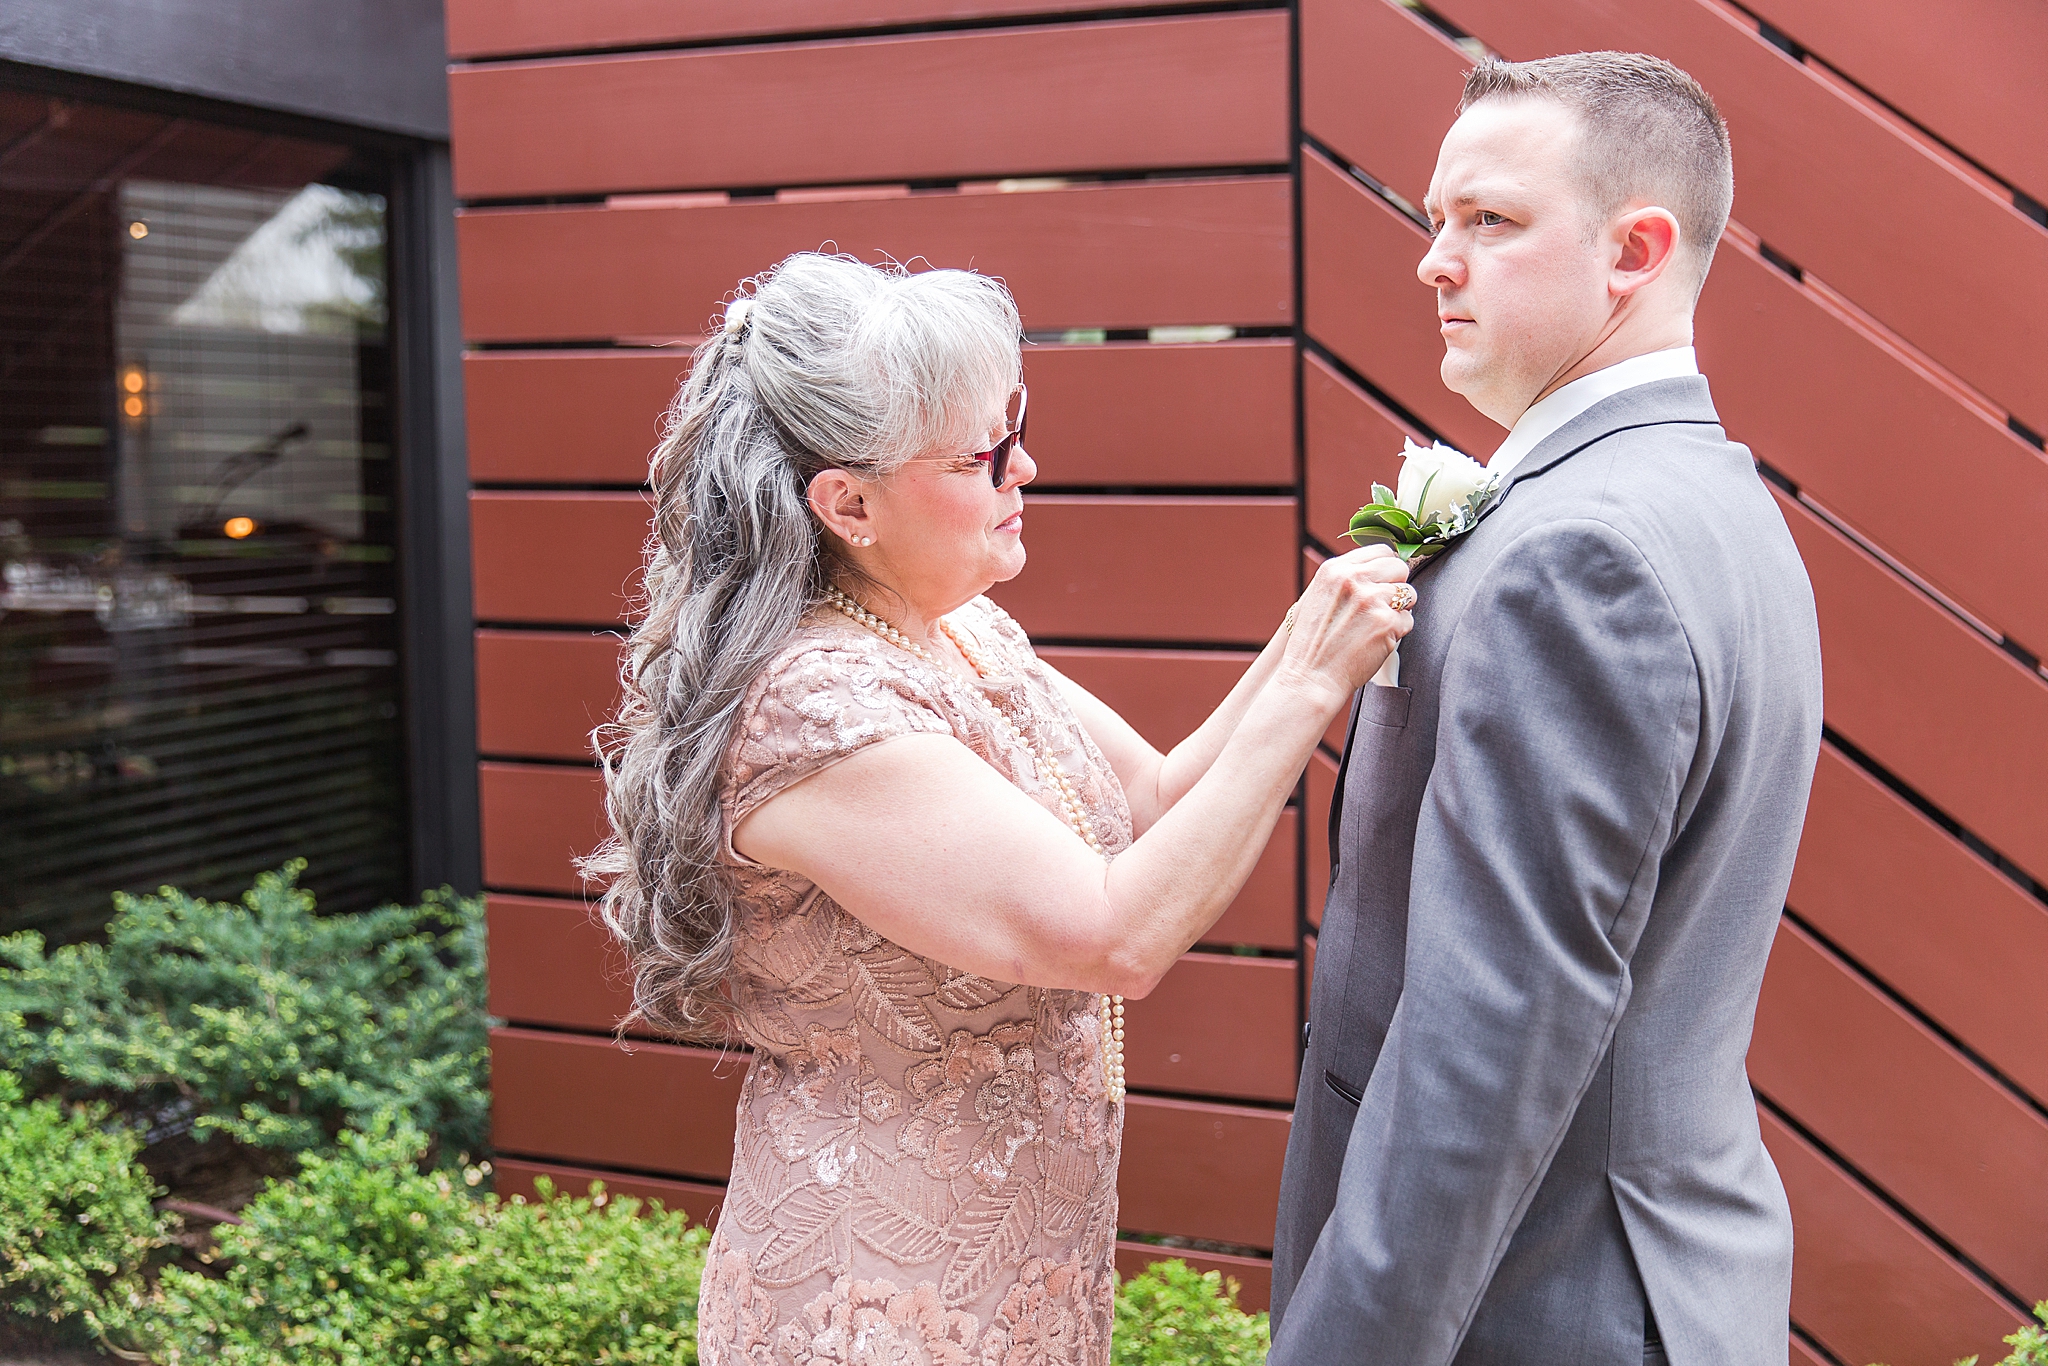 modern-romantic-wedding-photography-at-webers-in-ann-arbor-michigan-by-courtney-carolyn-photography_0016.jpg